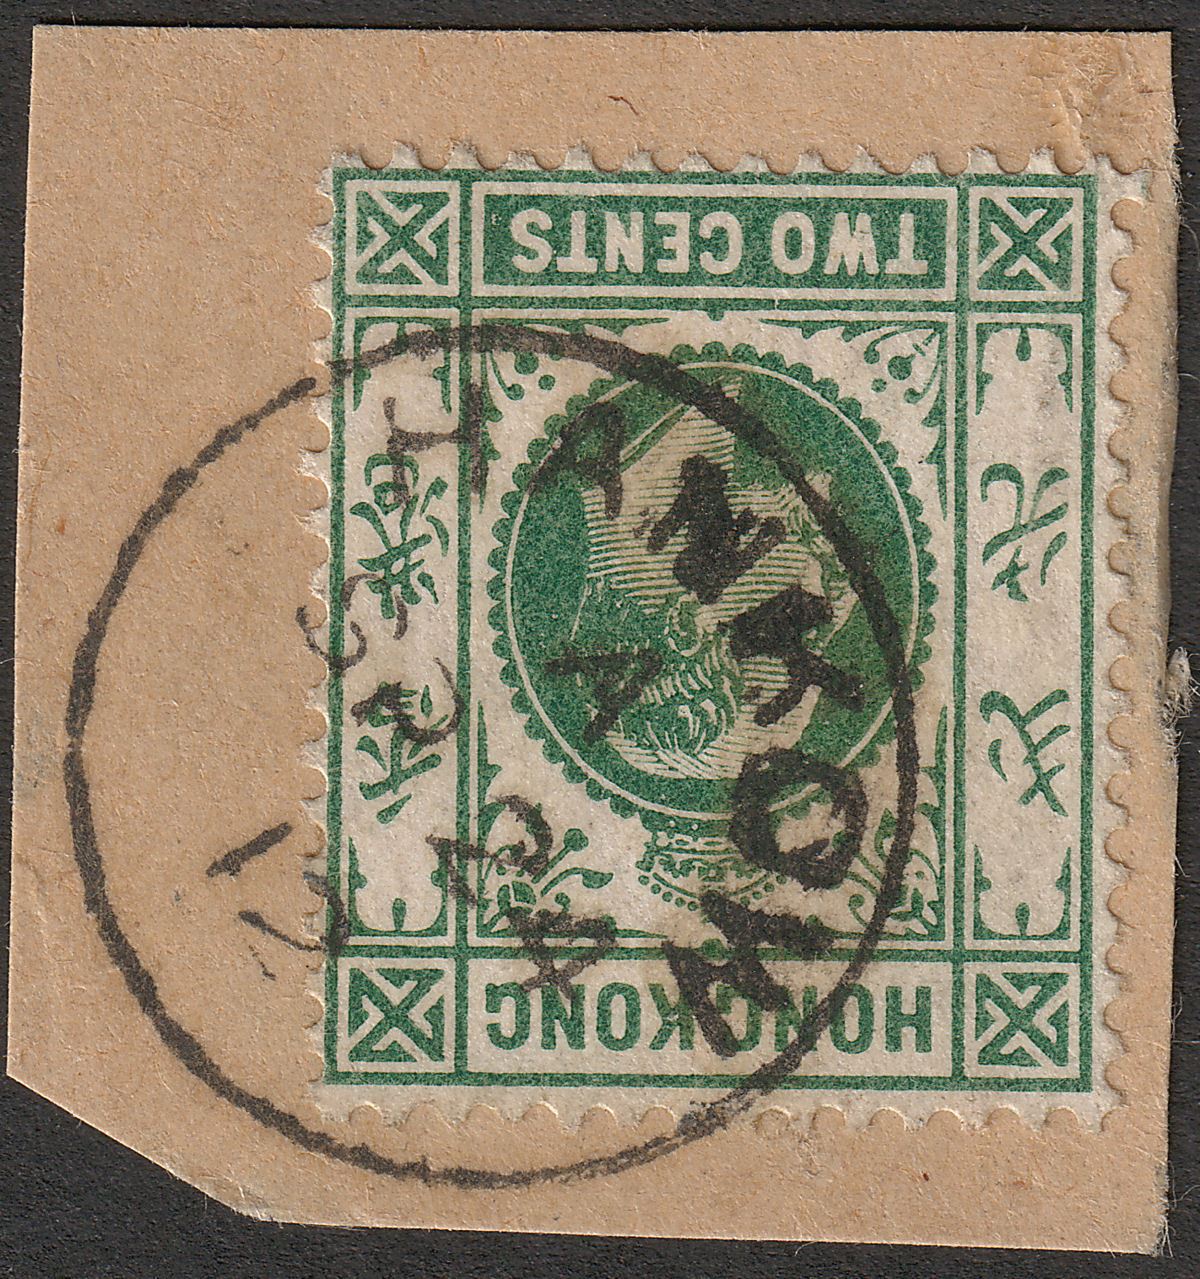 Hong Kong 1912 KEVII 2c Used on piece with HANKOW code A postmark SG Z505